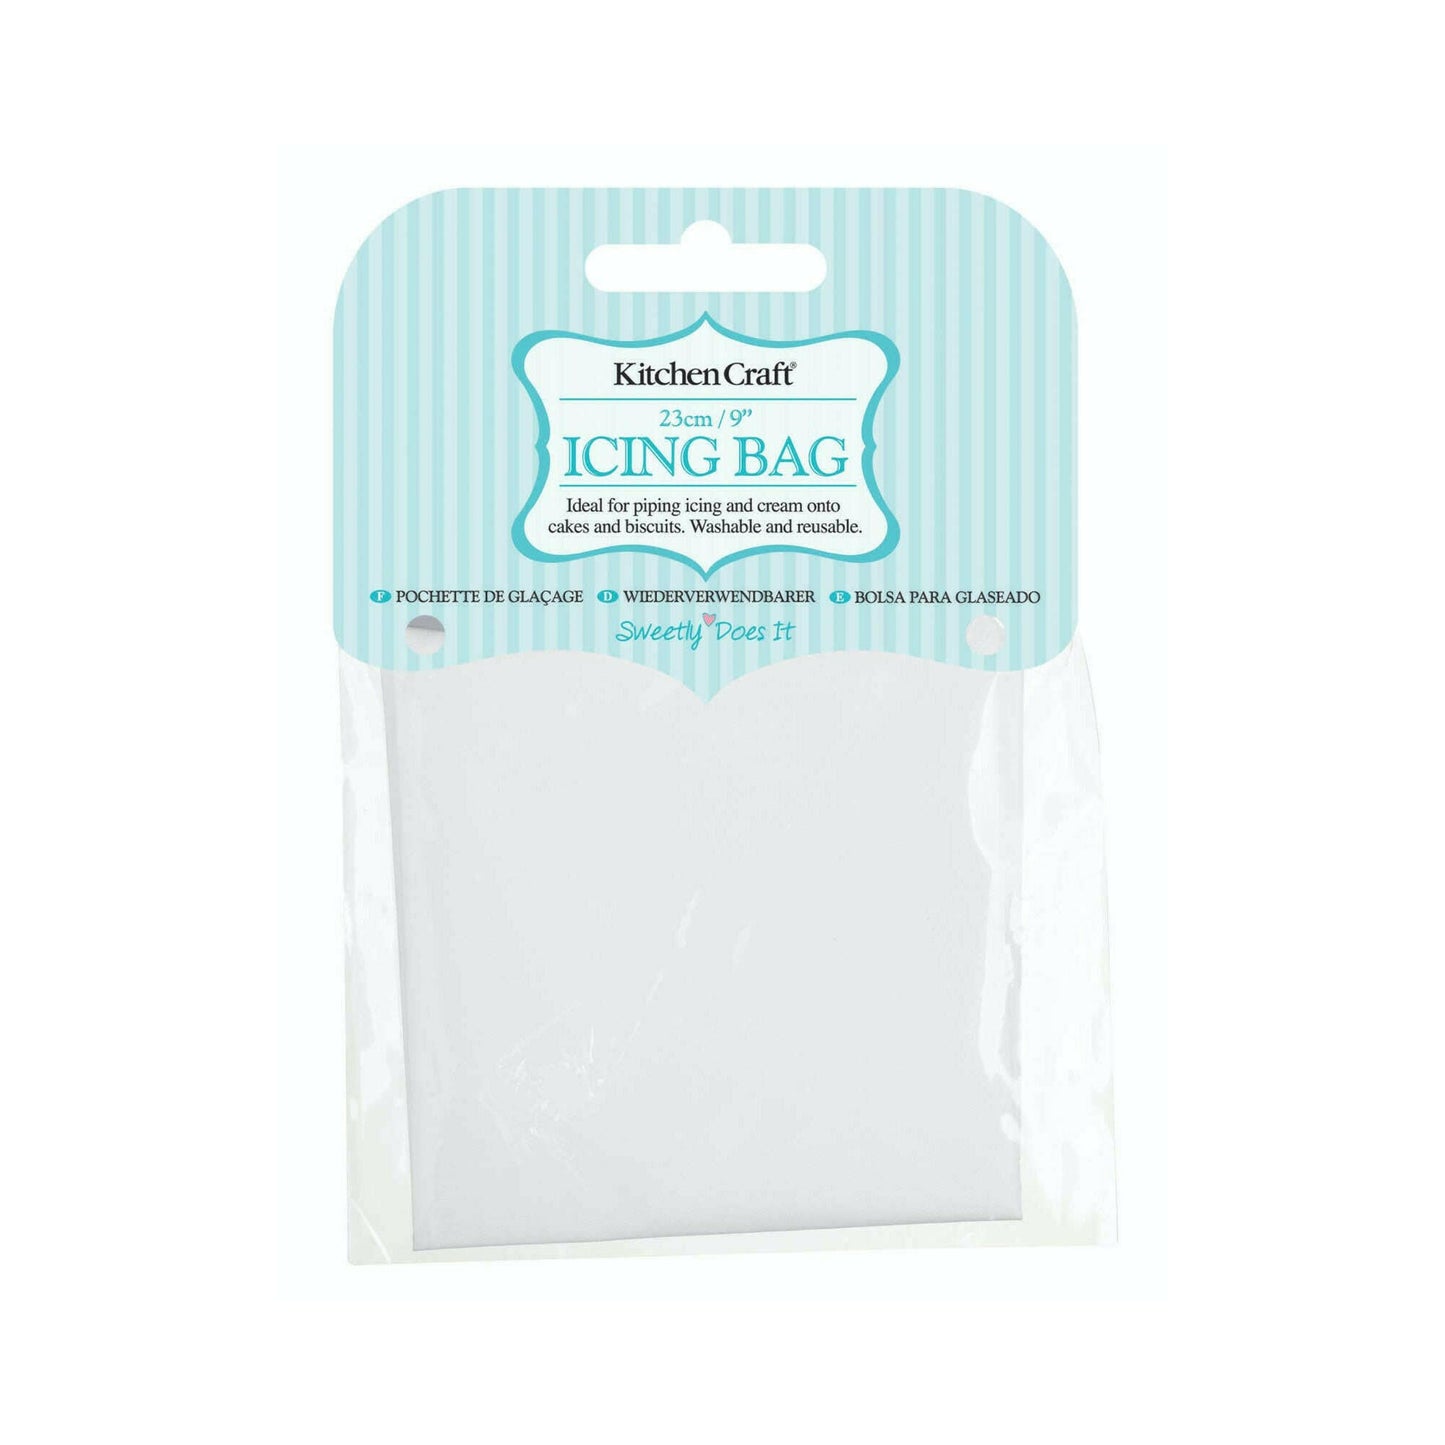 Sweetly Does It Icing Bag 23cm